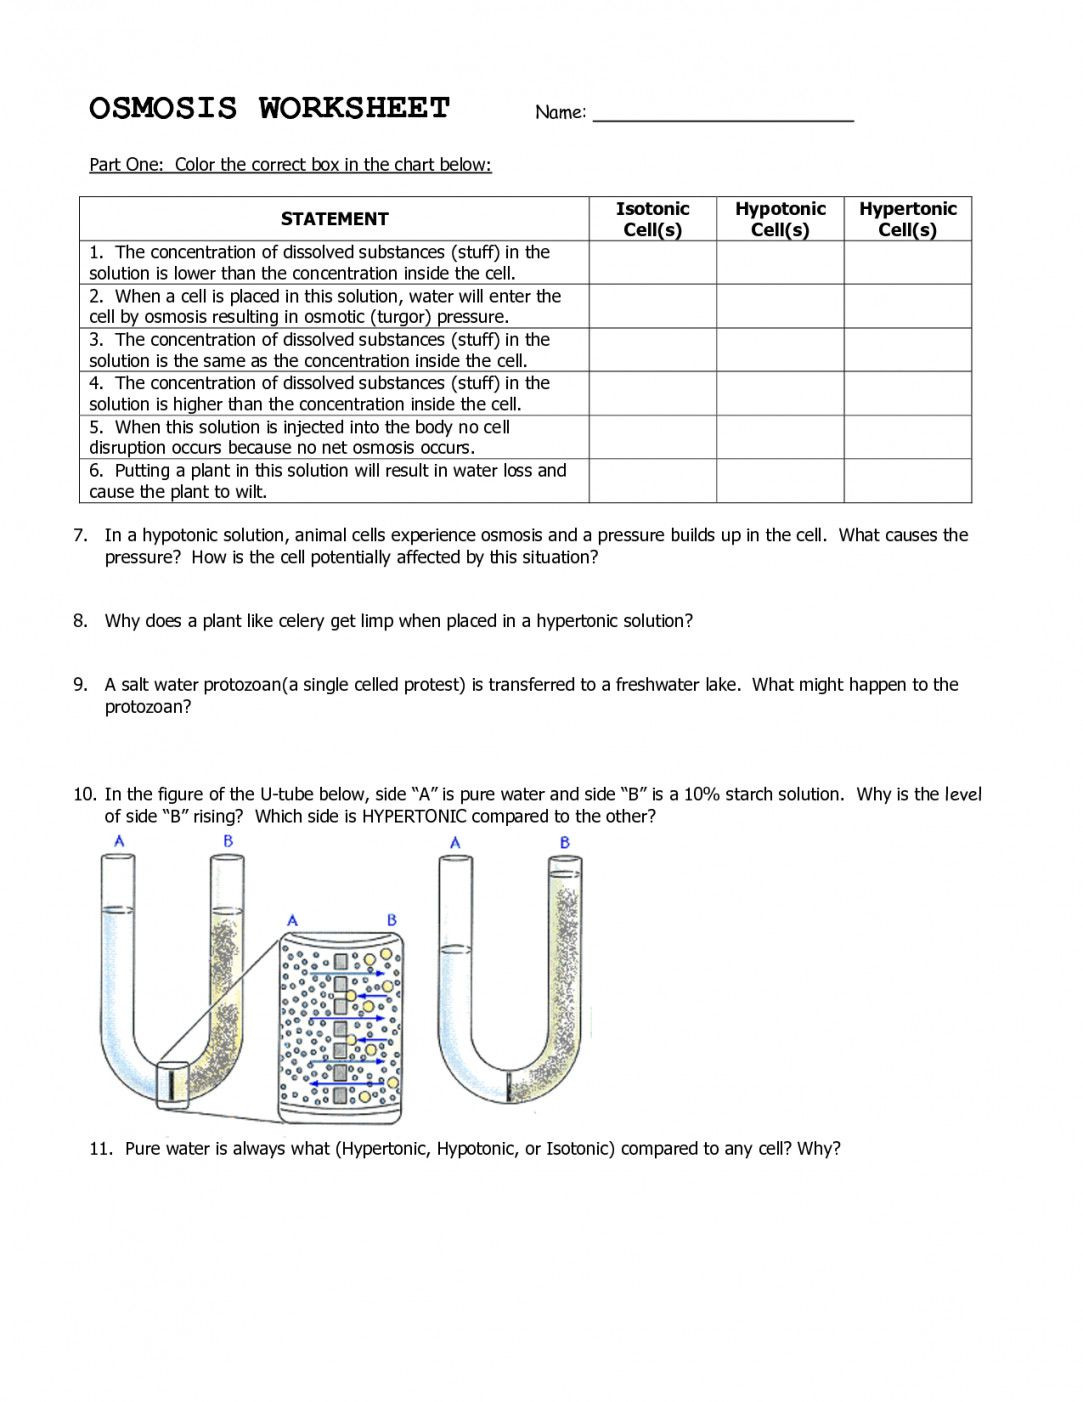 science-8-diffusion-and-osmosis-worksheet-answers-db-excel